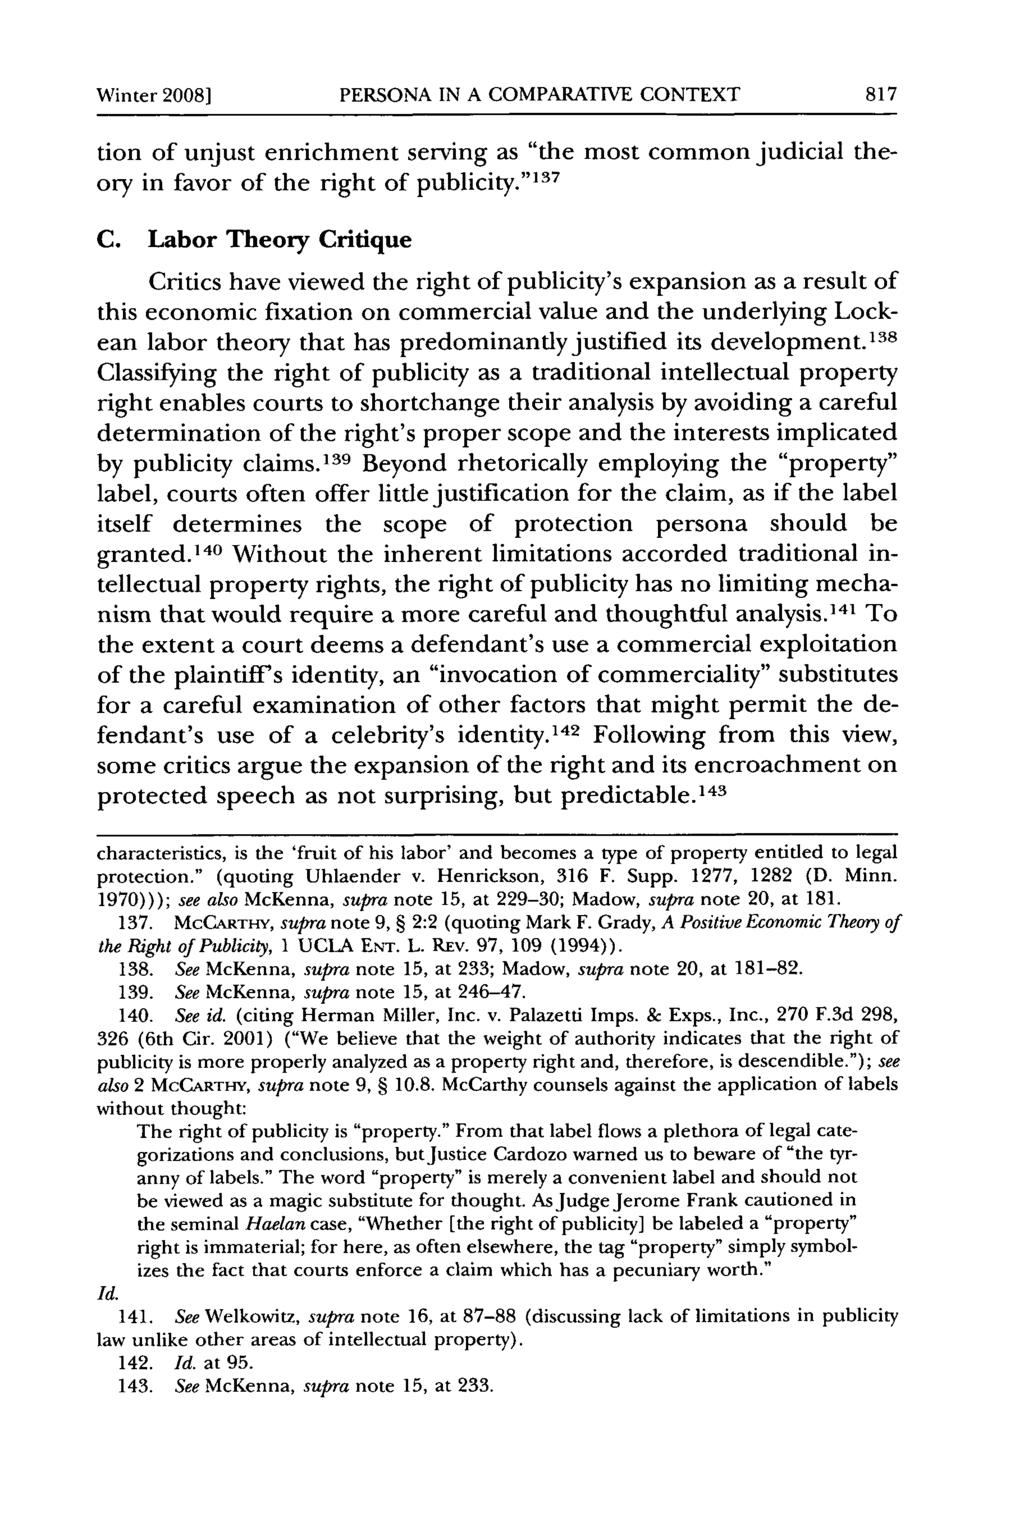 Winter 2008] PERSONA IN A COMPARATIVE CONTEXT tion of unjust enrichment serving as "the most common judicial theory in favor of the right of publicity." ' 13 7 C.